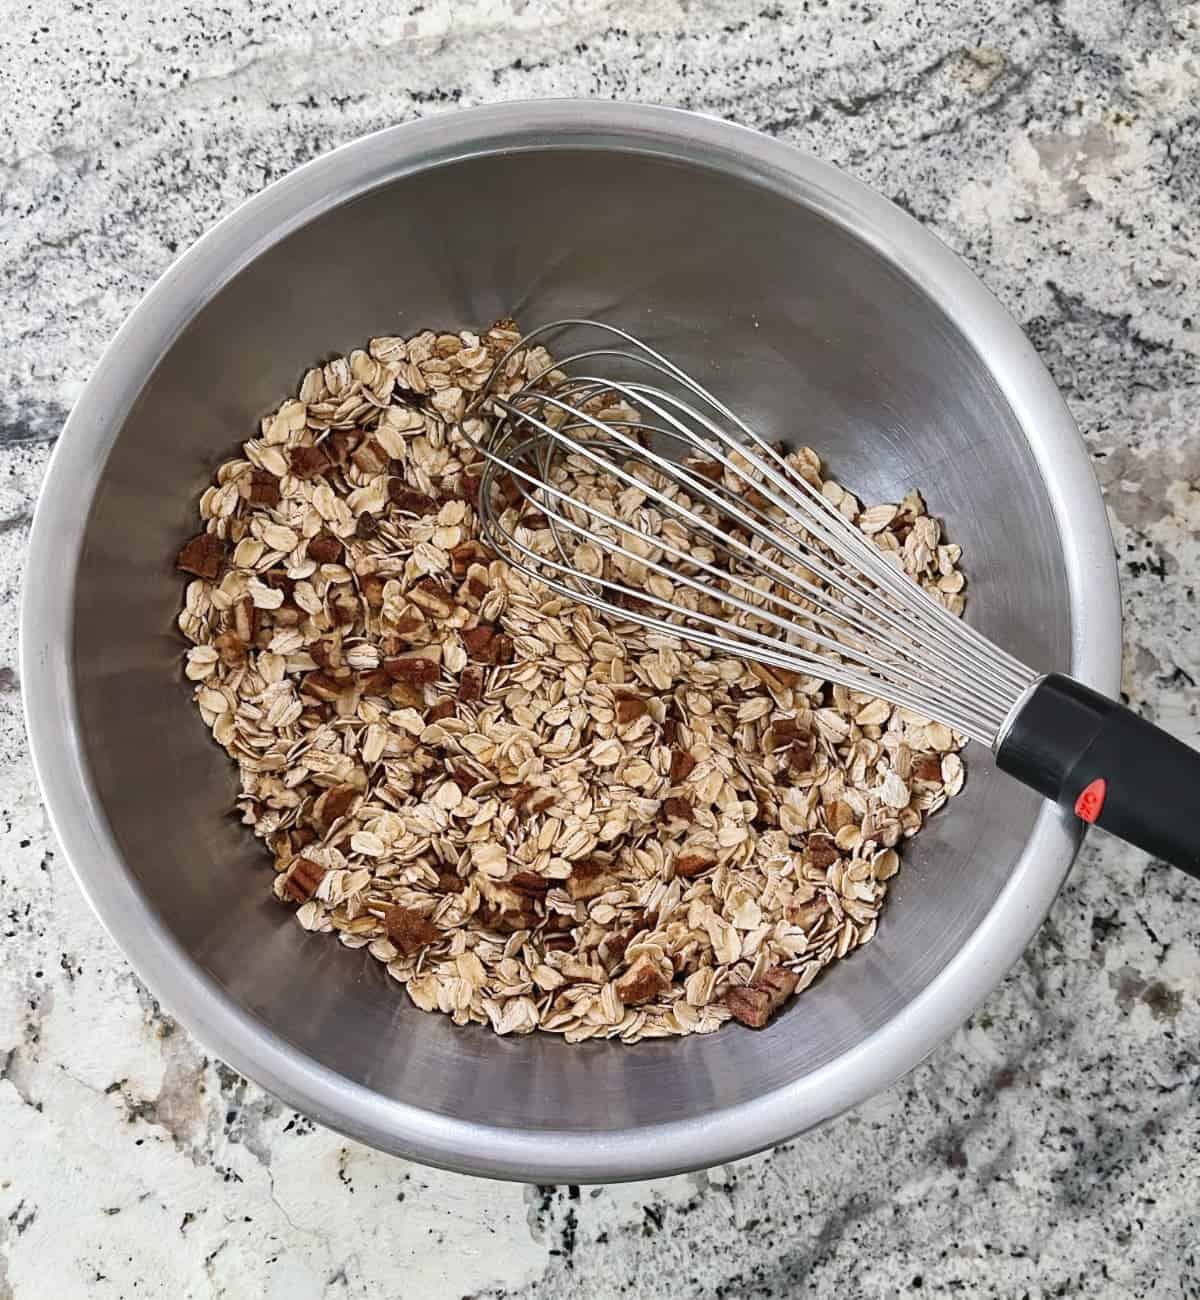 Rolled oats, chopped pecans, flax meal and ground cinnamon in mixing bowl with whisk.